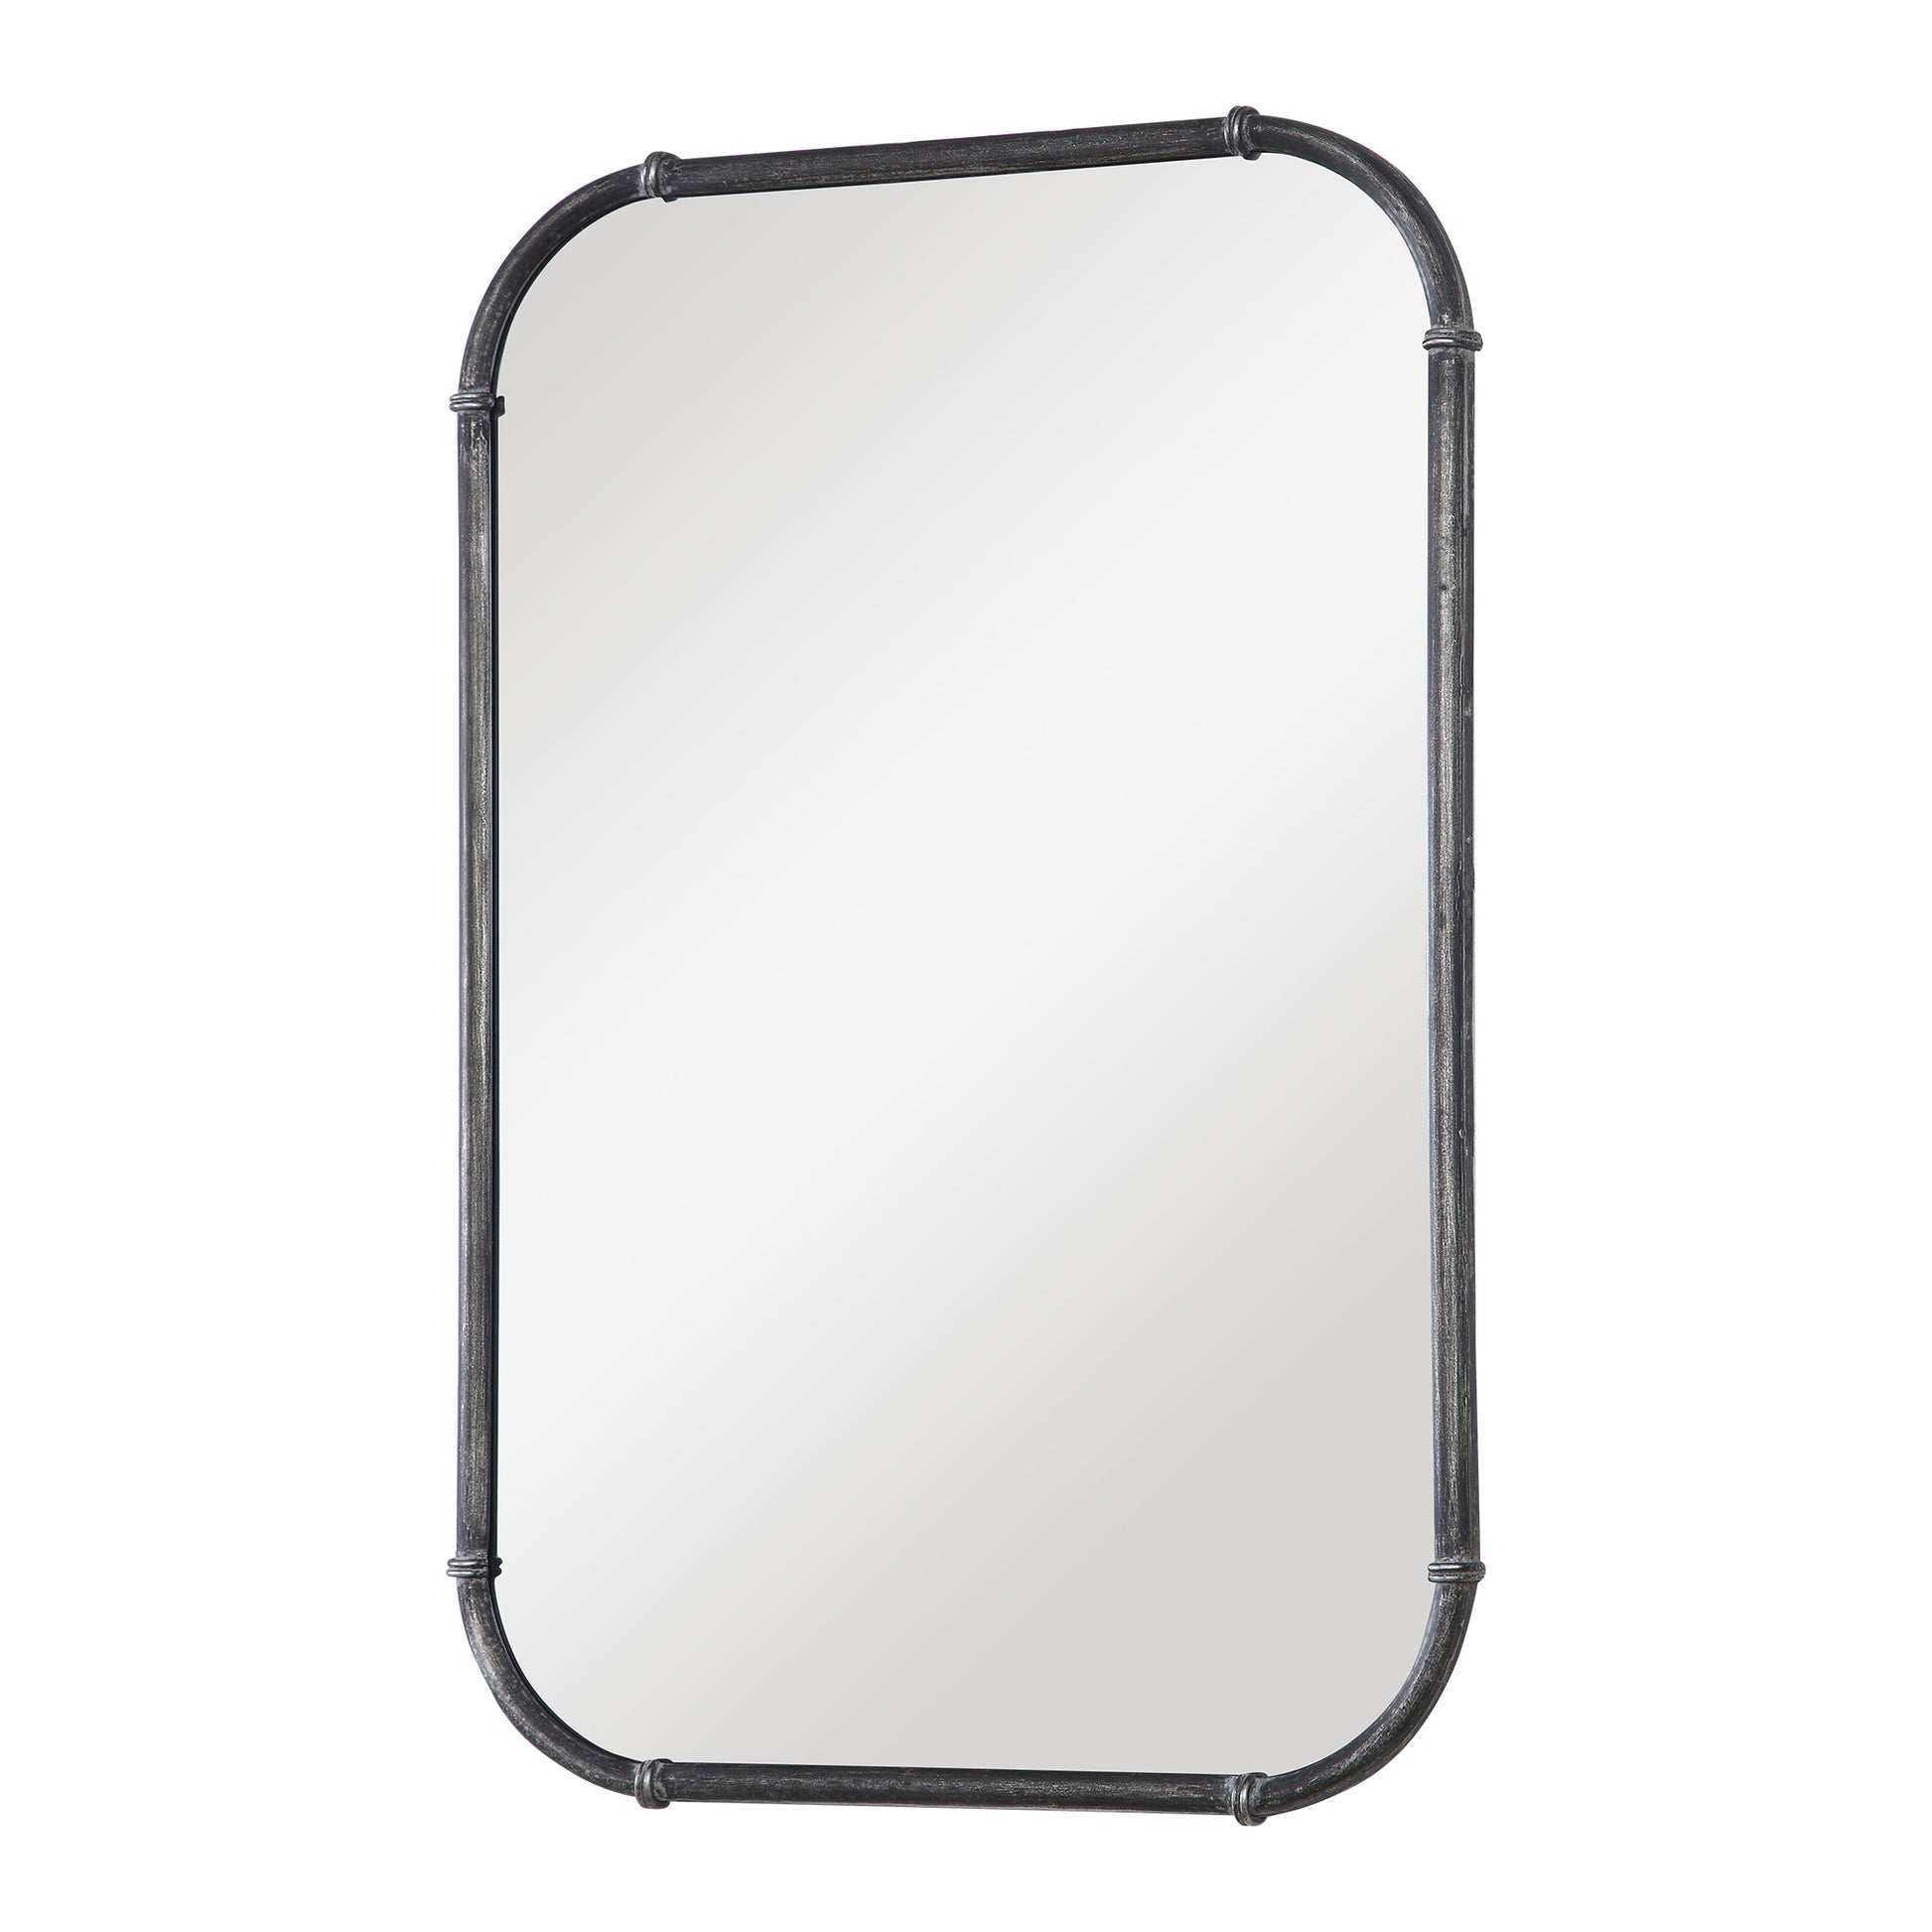 Rounded corners soften frame By Modish Store | Mirrors | Modishstore - 4